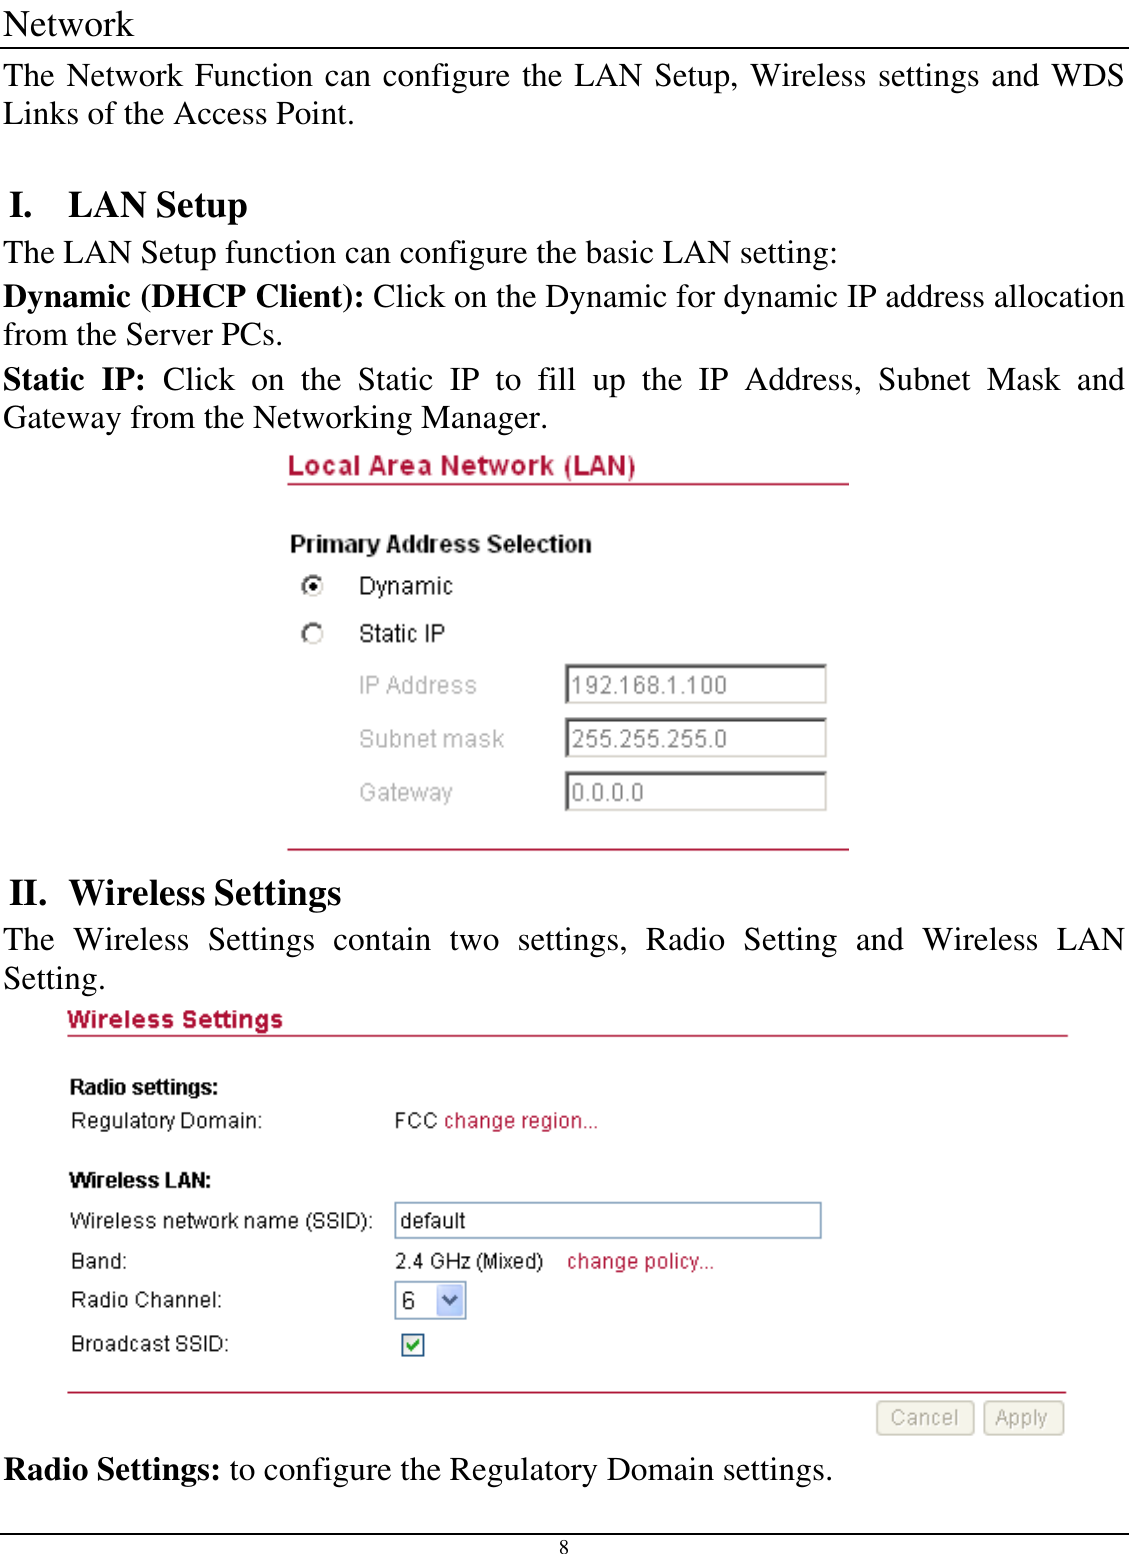  8 Network The Network Function can configure the LAN Setup, Wireless settings and WDS Links of the Access Point.  I. LAN Setup The LAN Setup function can configure the basic LAN setting: Dynamic (DHCP Client): Click on the Dynamic for dynamic IP address allocation from the Server PCs.  Static IP: Click on the Static IP to fill up the IP Address, Subnet Mask and Gateway from the Networking Manager.  II. Wireless Settings The Wireless Settings contain two settings, Radio Setting and Wireless LAN Setting.  Radio Settings: to configure the Regulatory Domain settings. 